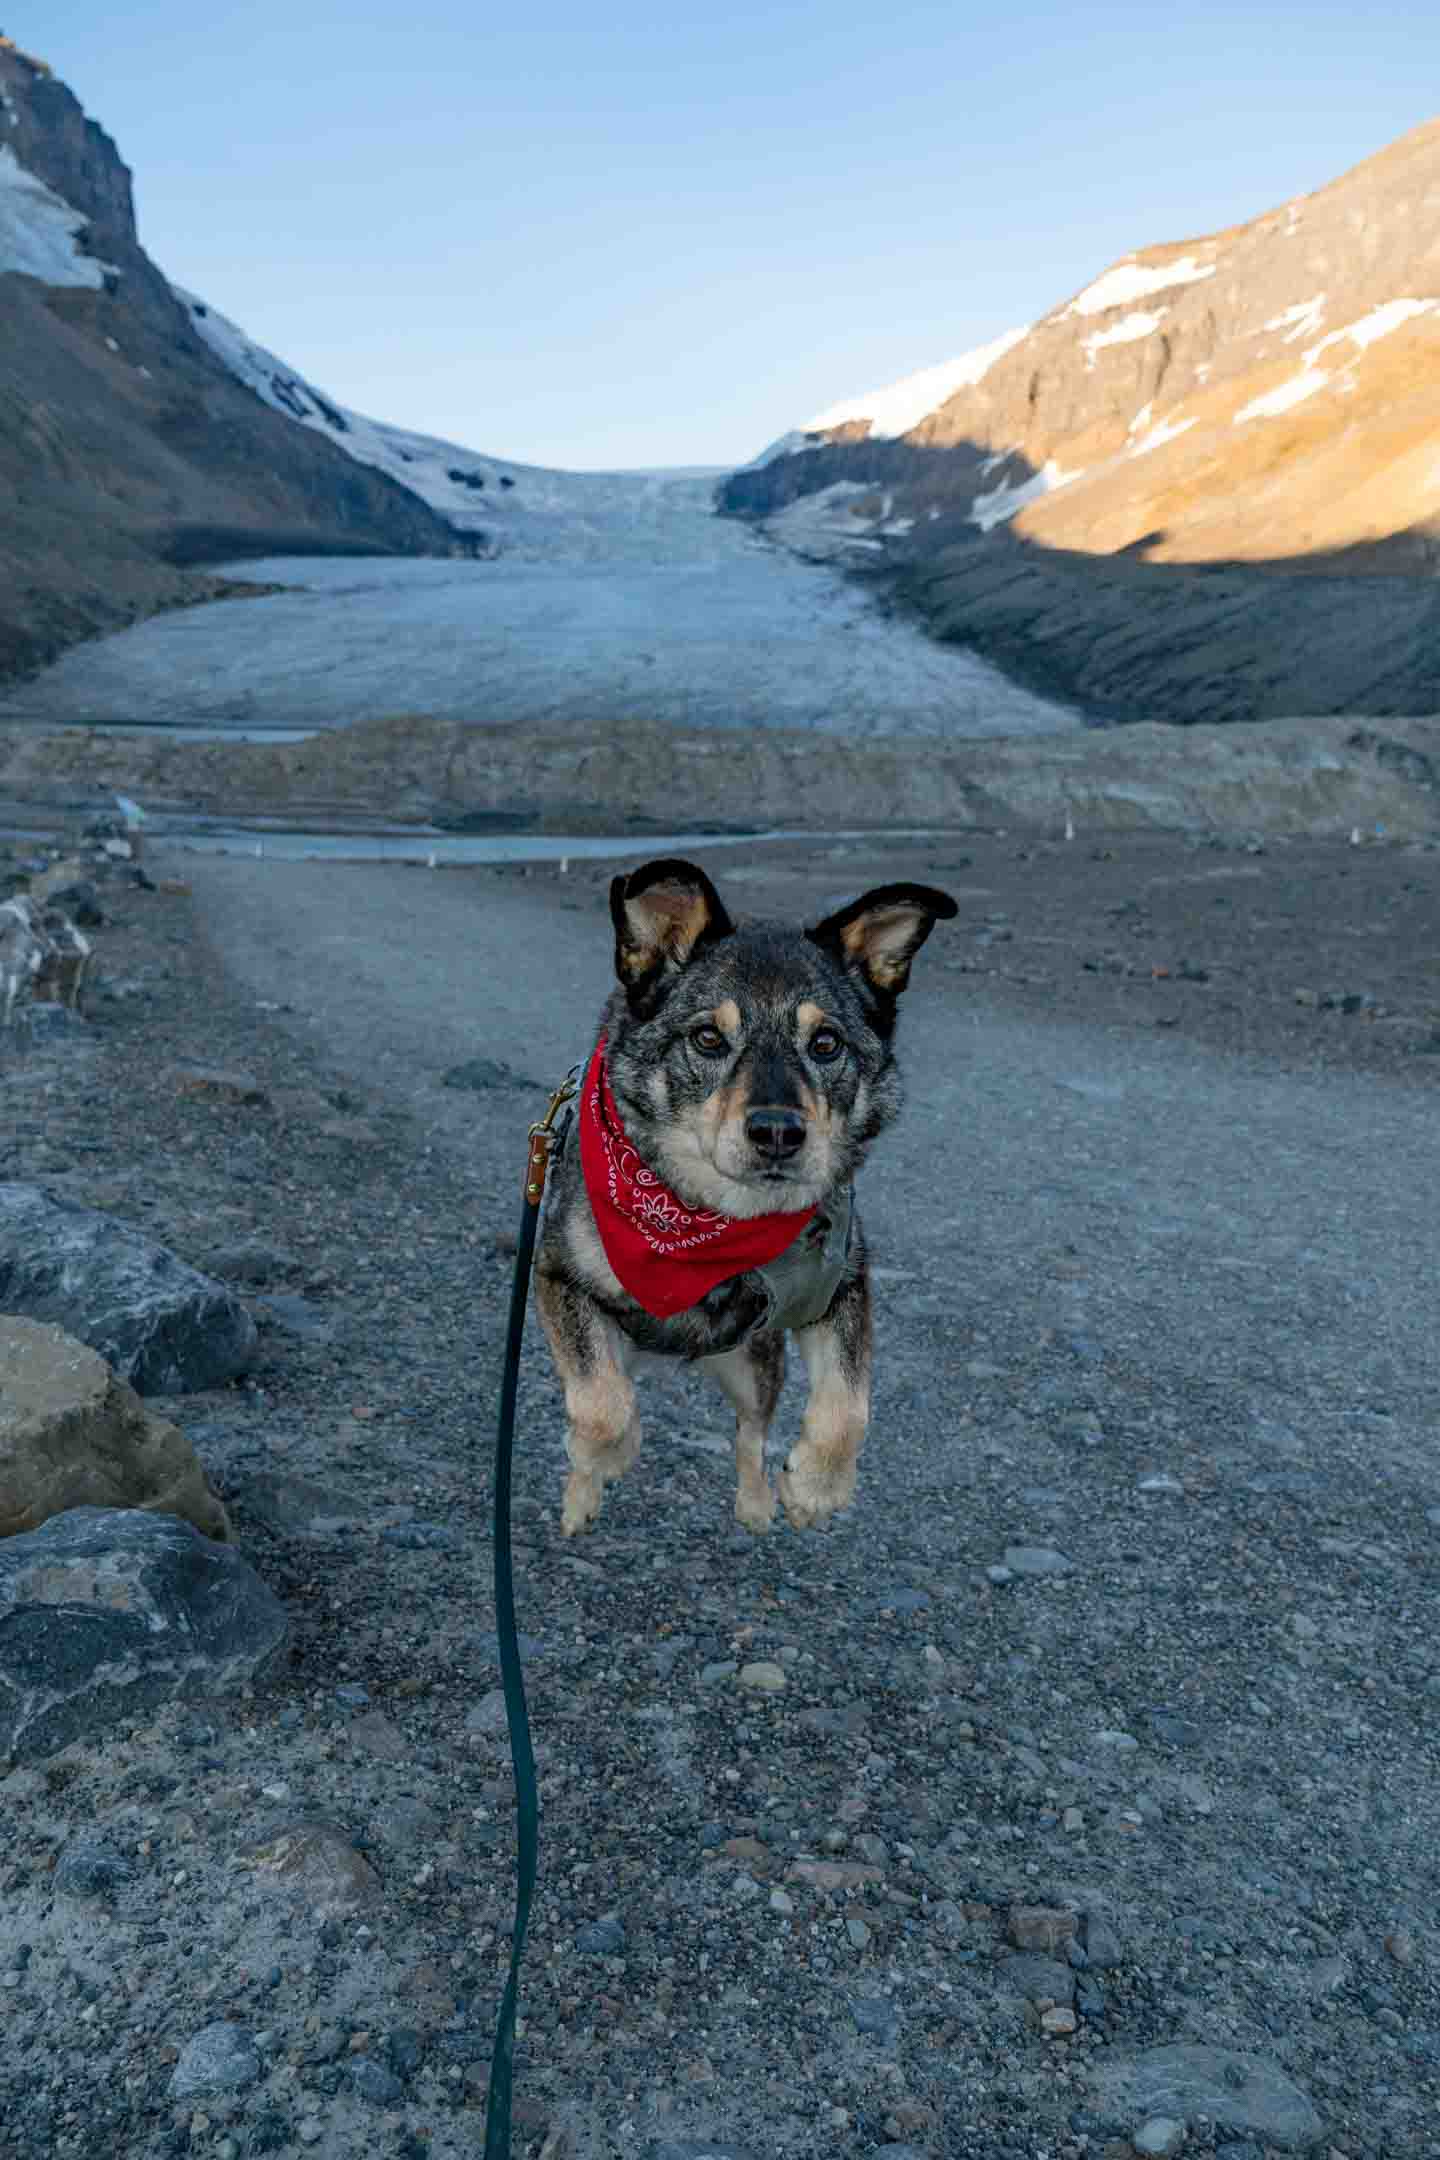 Cattle dog jumping in the air at the pet friendly Athabasca Glacier trail in Jasper.